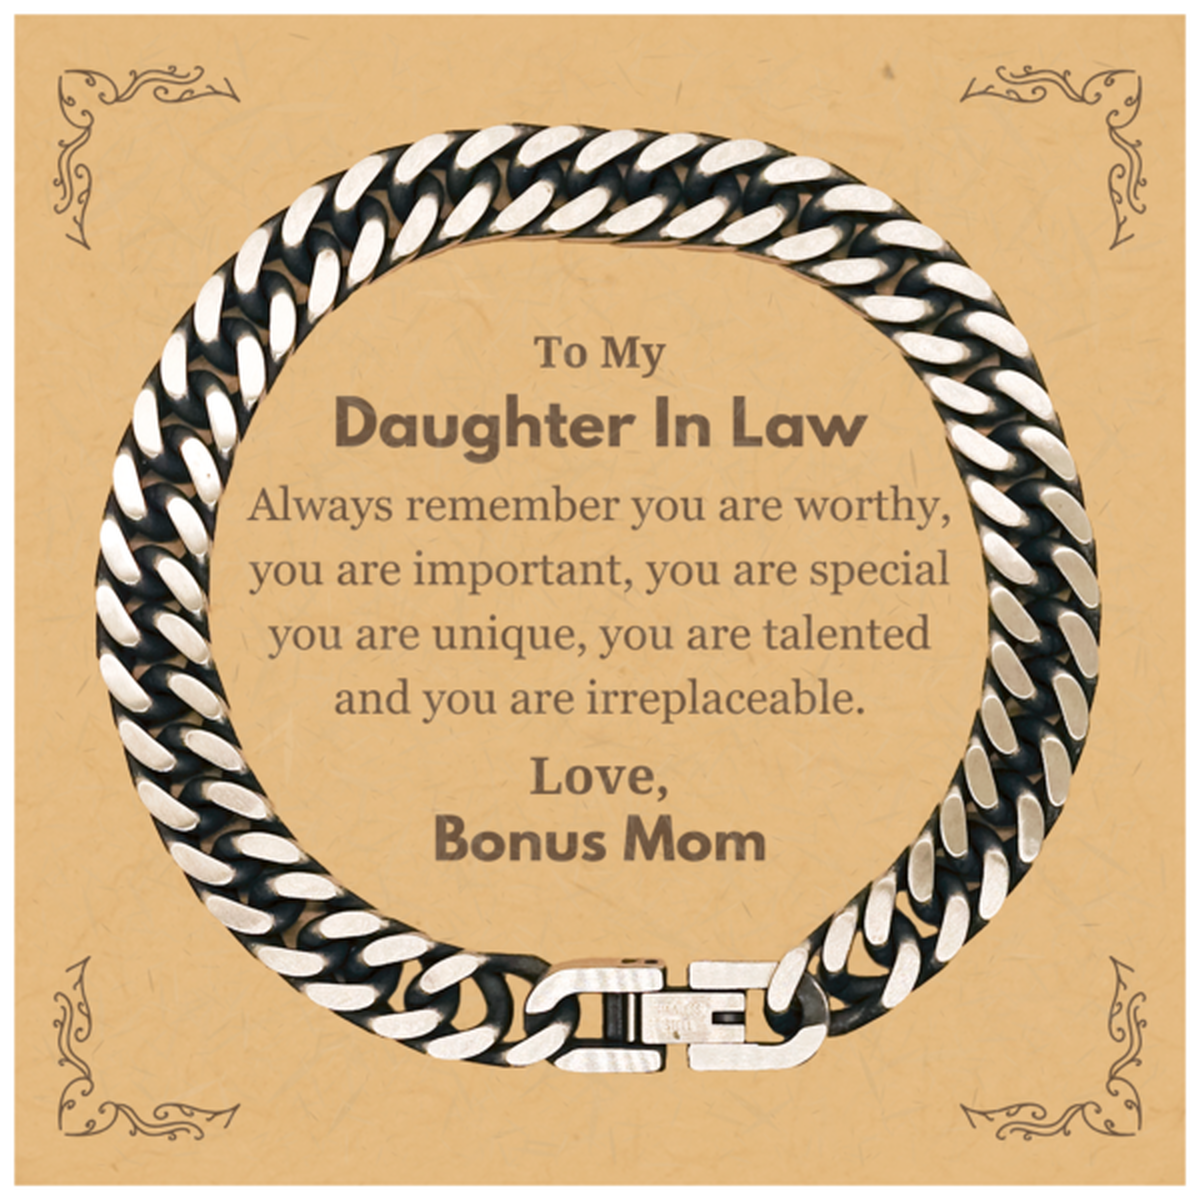 Daughter In Law Birthday Gifts from Bonus Mom, Inspirational Cuban Link Chain Bracelet for Daughter In Law Christmas Graduation Gifts for Daughter In Law Always remember you are worthy, you are important. Love, Bonus Mom